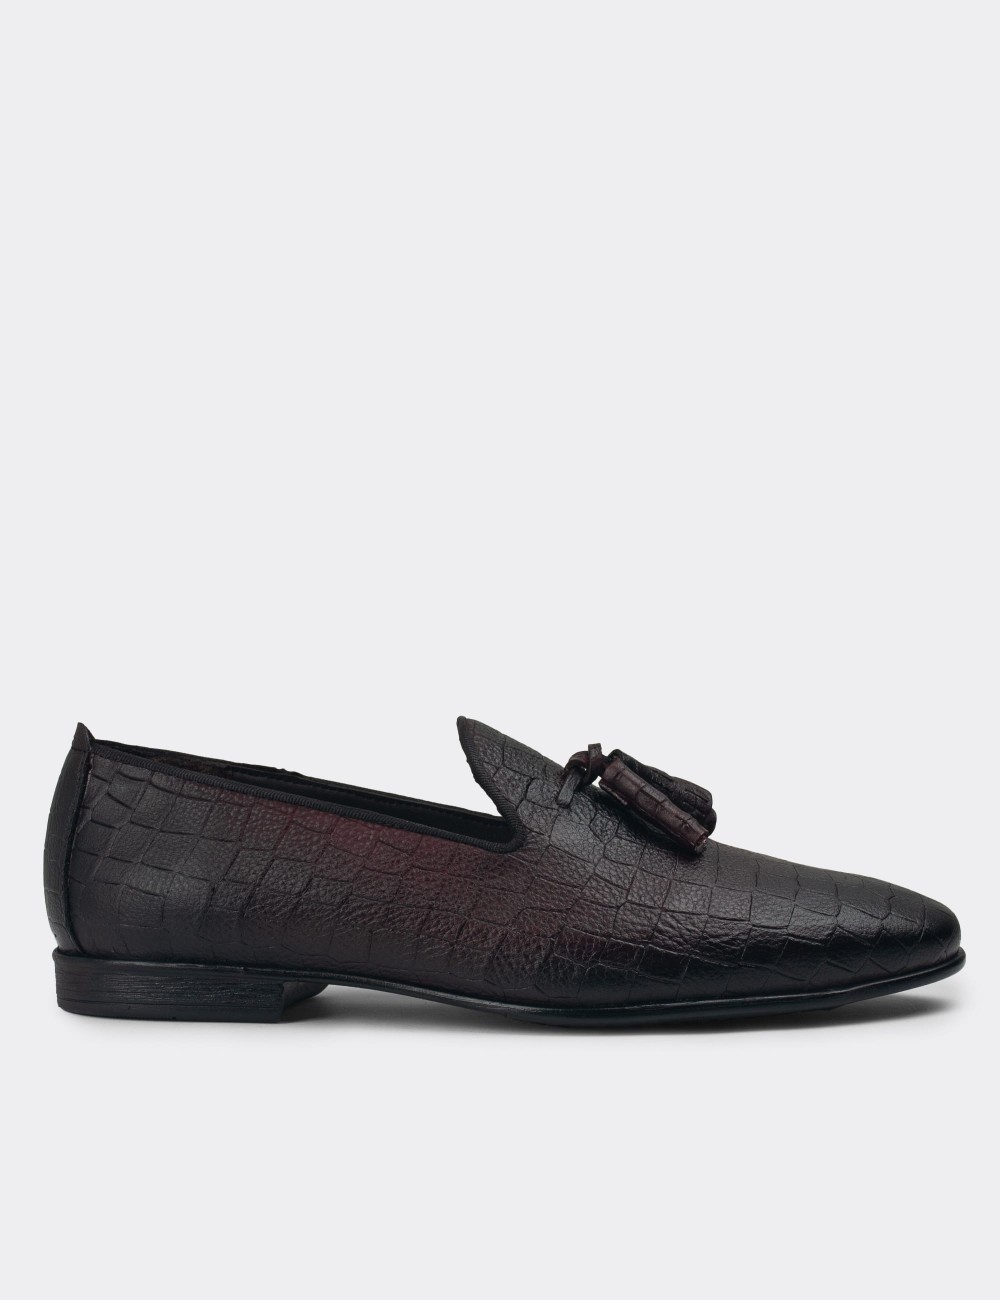 Burgundy Leather Loafers - 01702MBRDC03